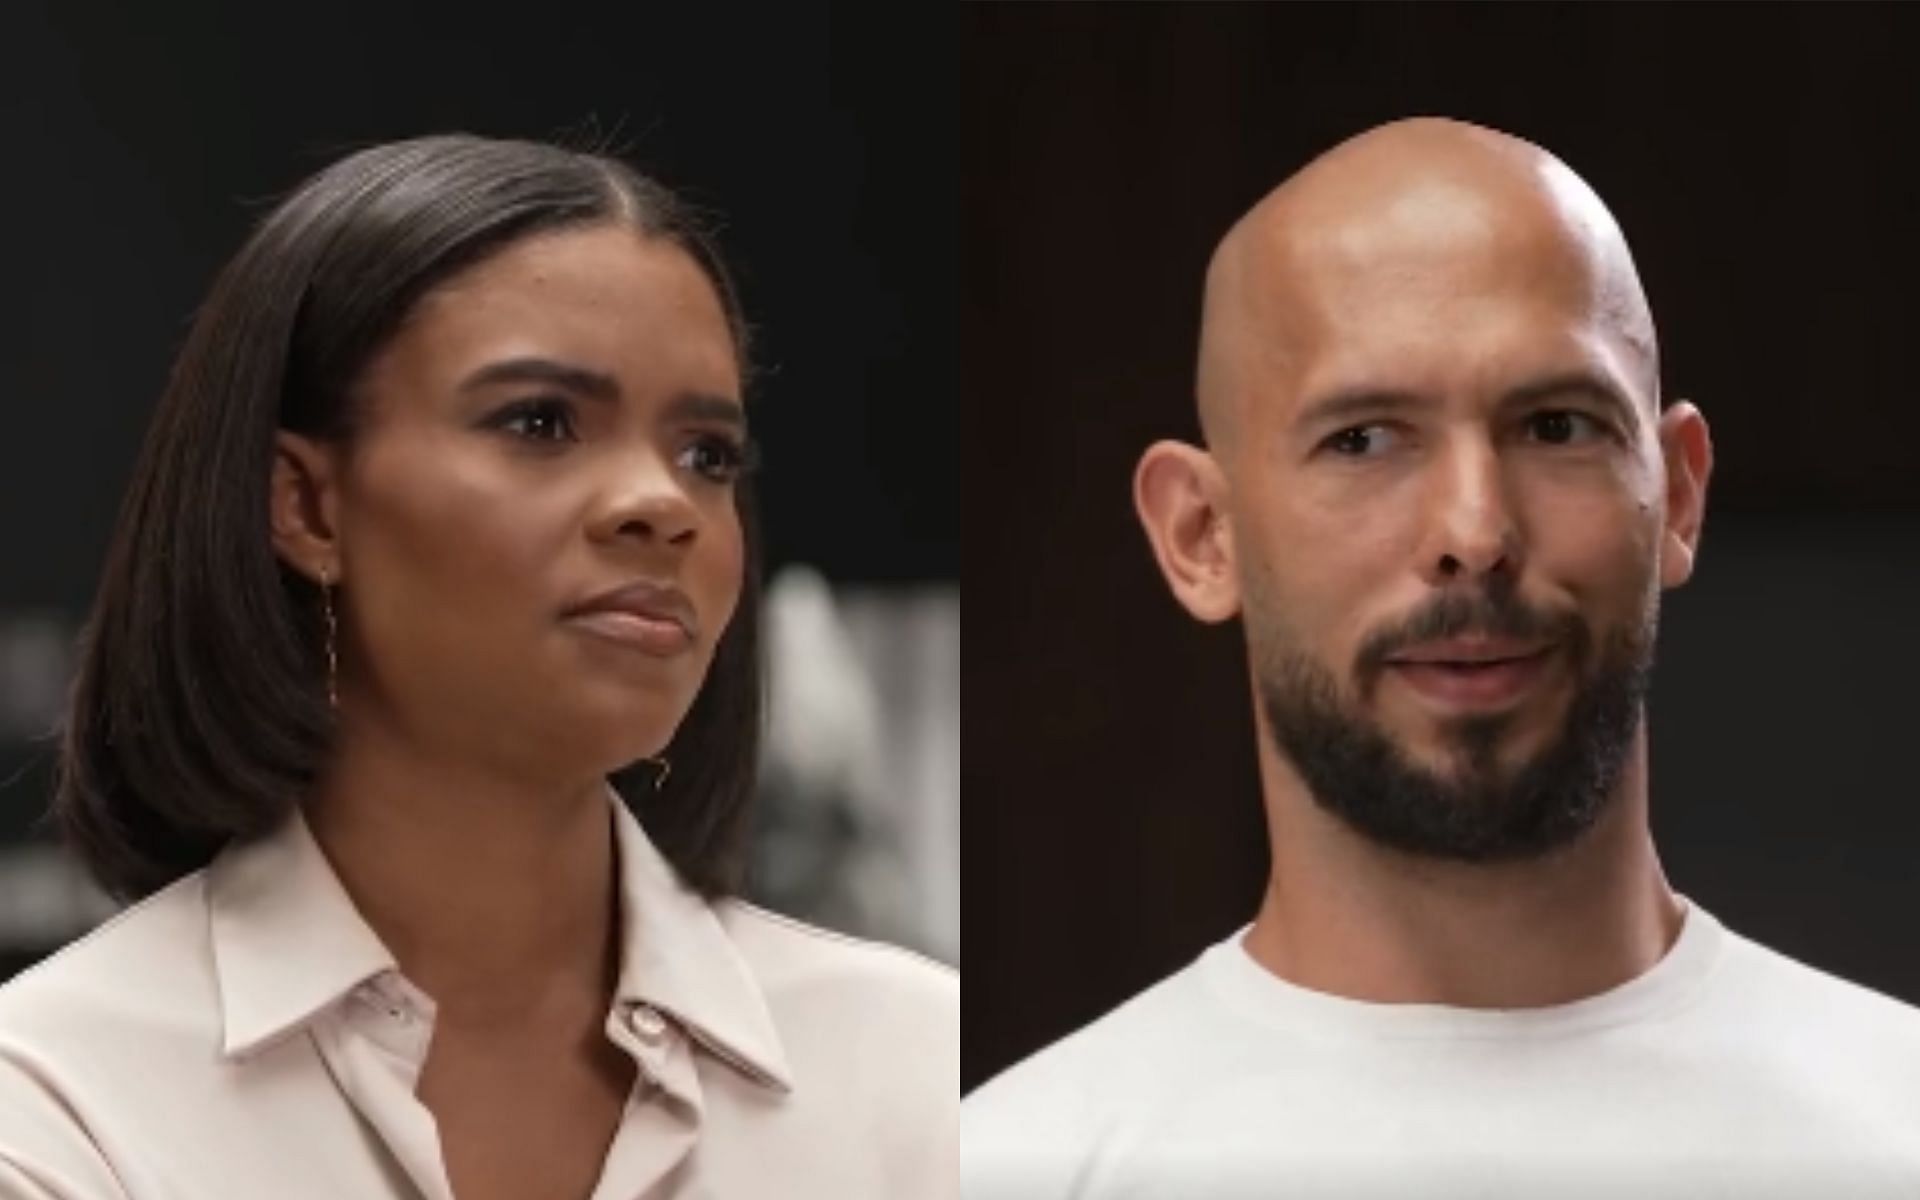 Candace Owens (Left) Andrew Tate (Right) [Image courtesy: @ReachMorpheuss on Twitter] 